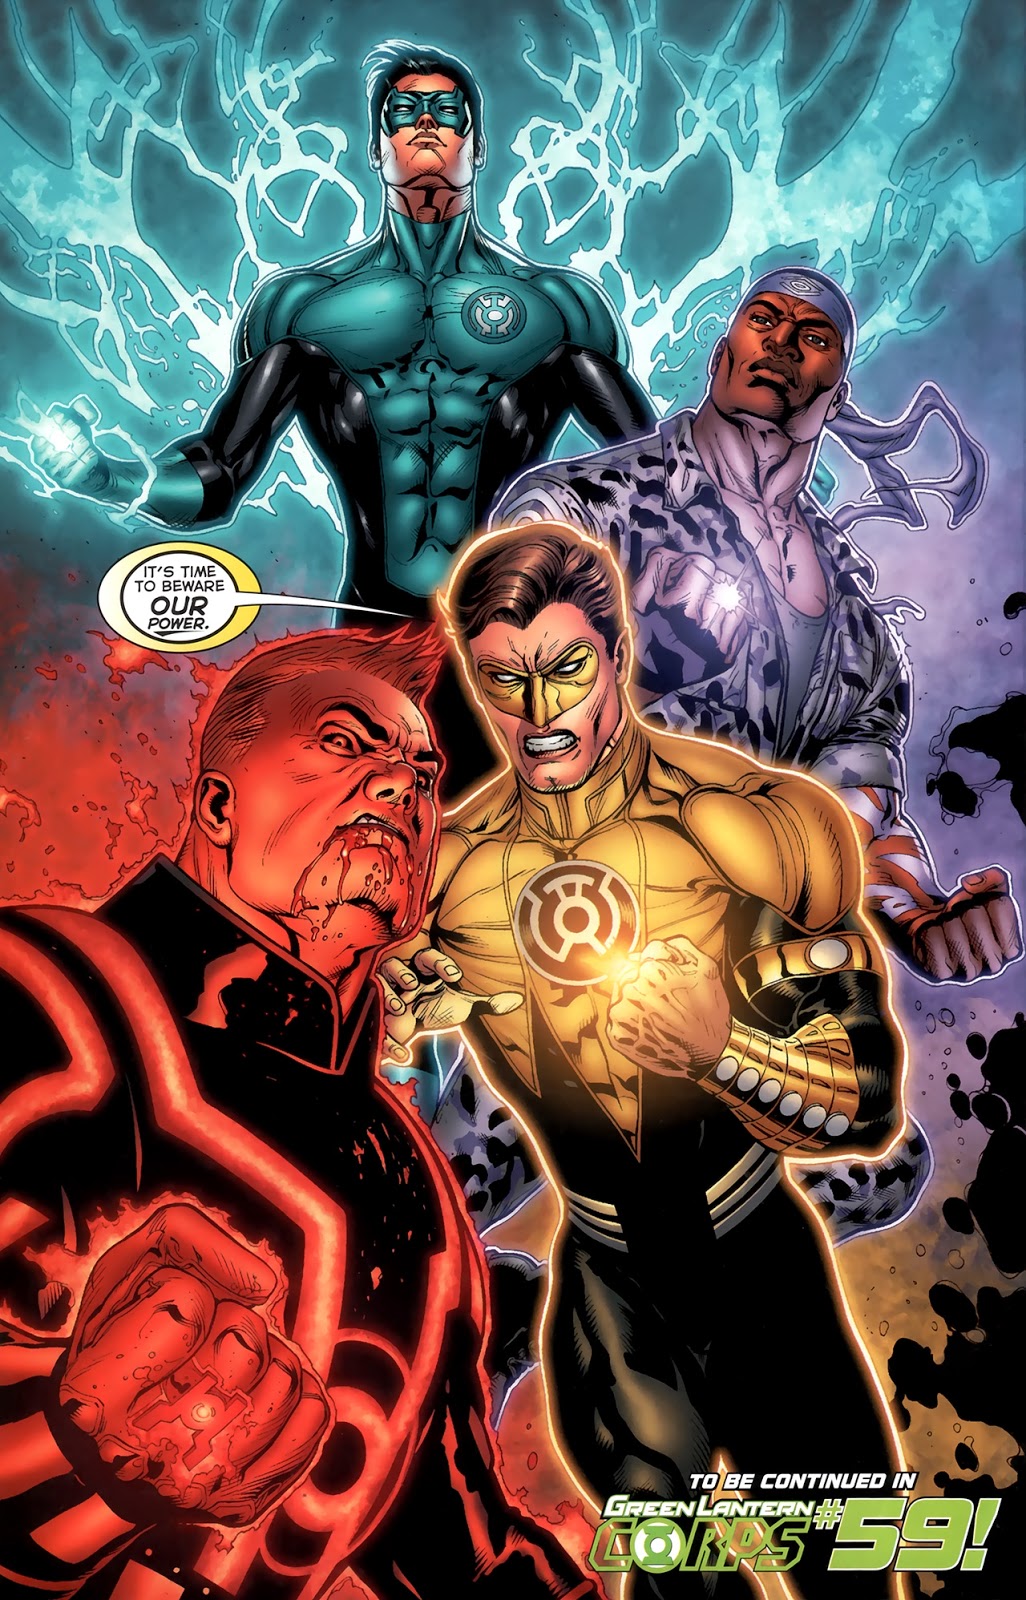 Green Lanterns Using Rings From Other Emotional Corps